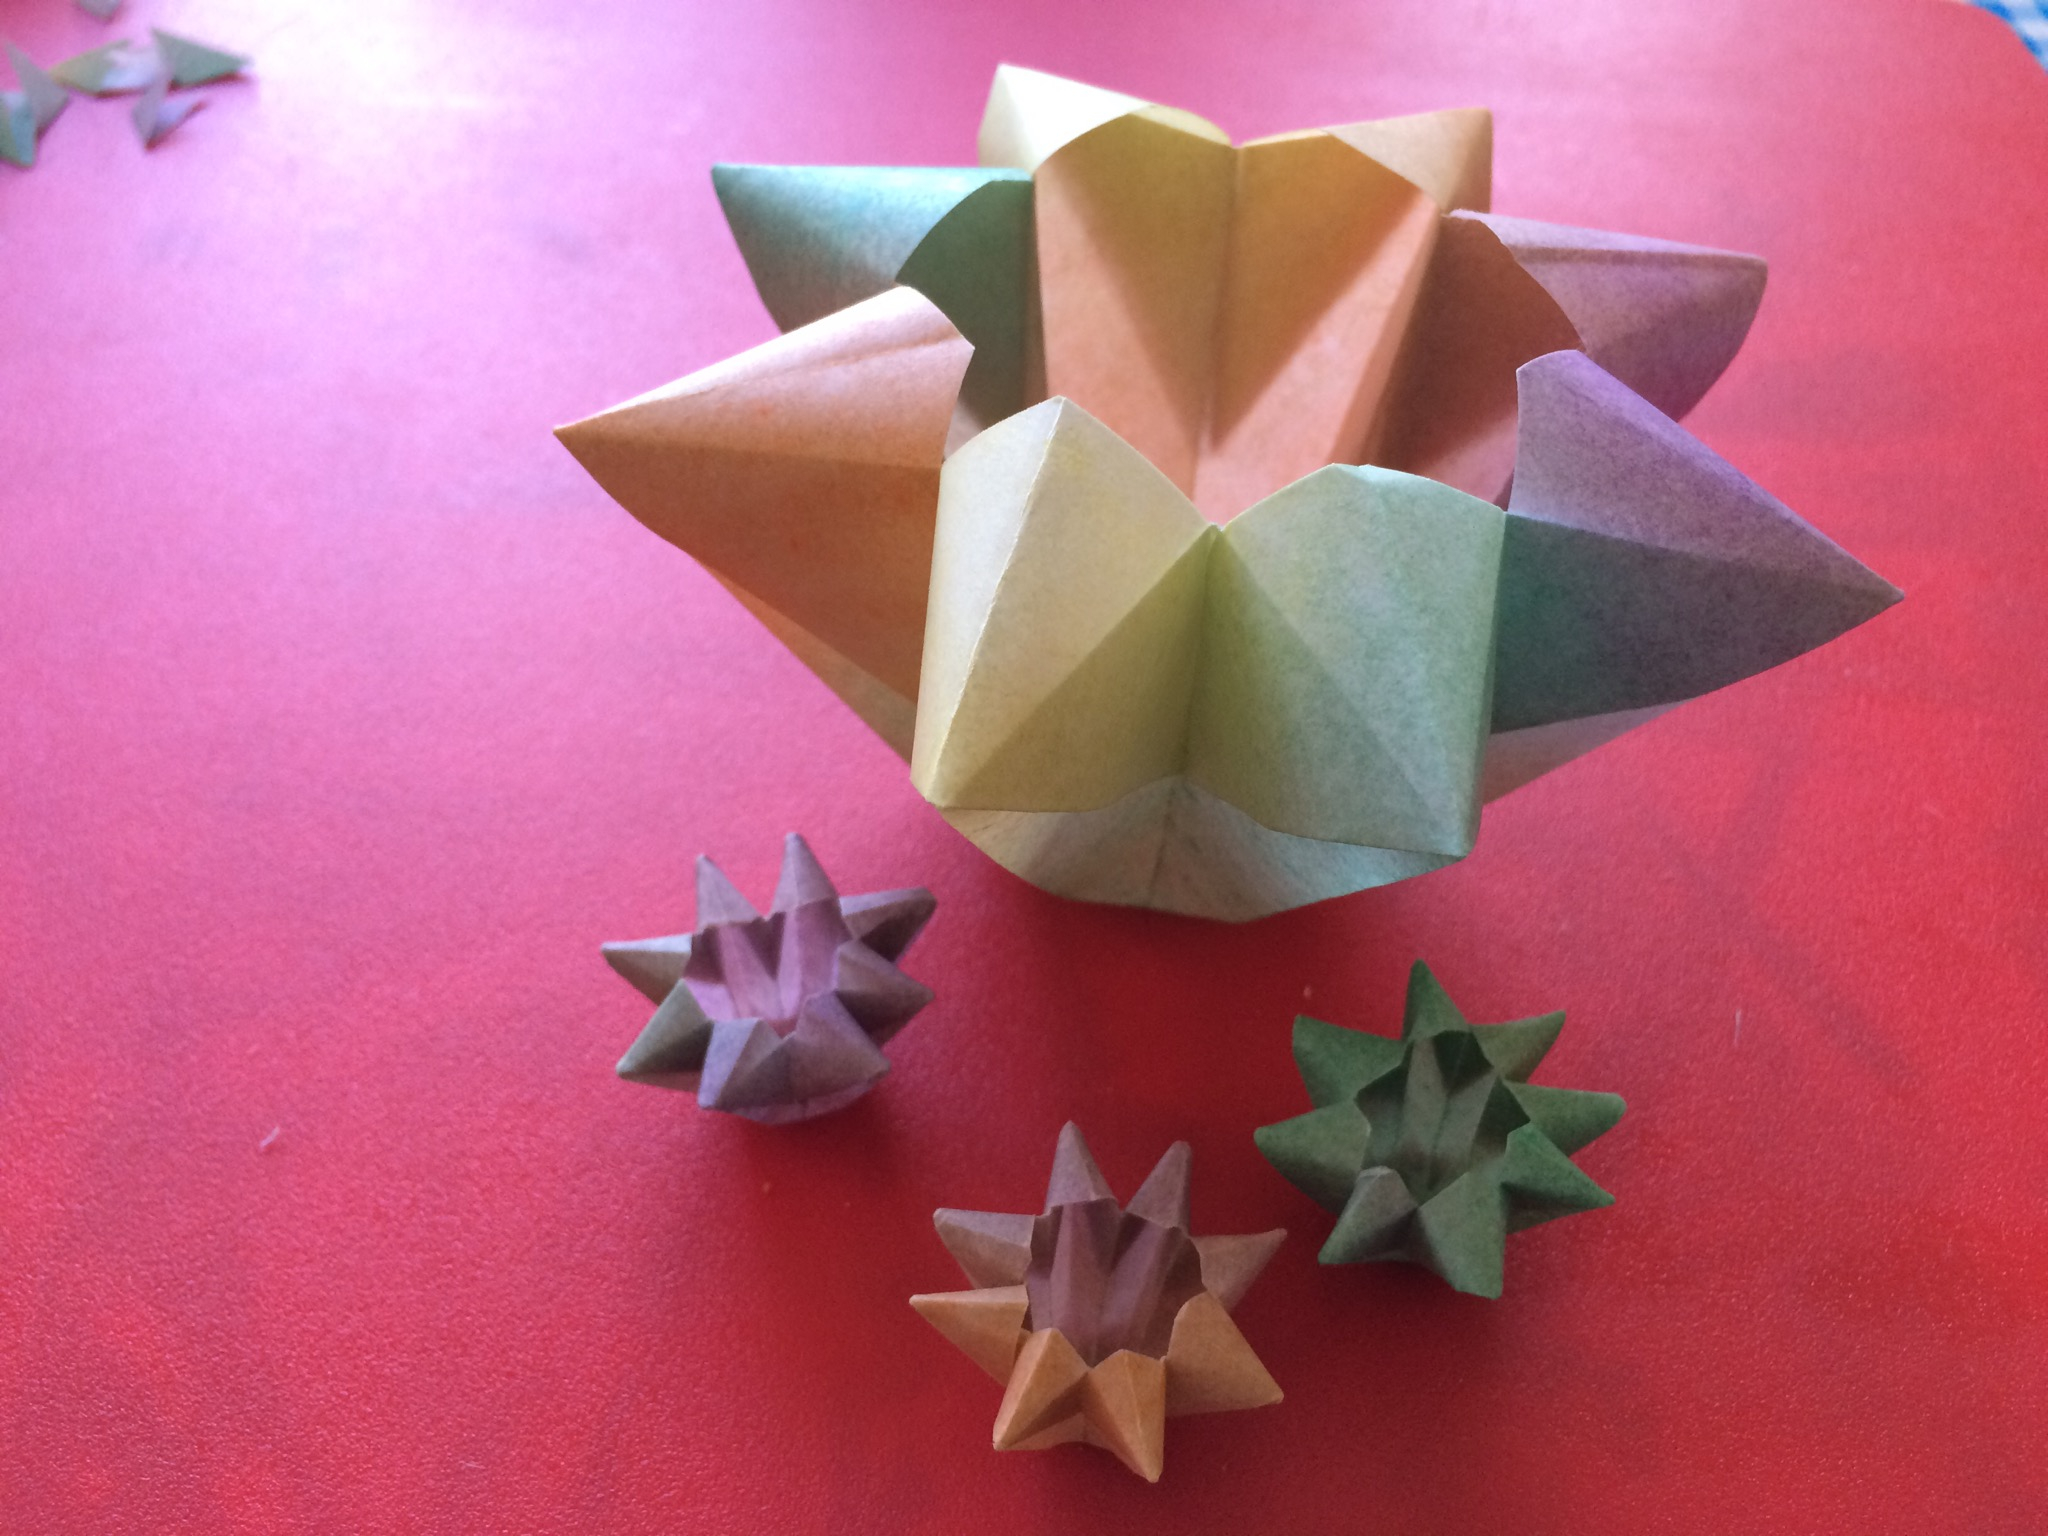 Origami Lantern Ball Instructions How To Make A Waldorf Star Lantern Tutorial The Art Of Home